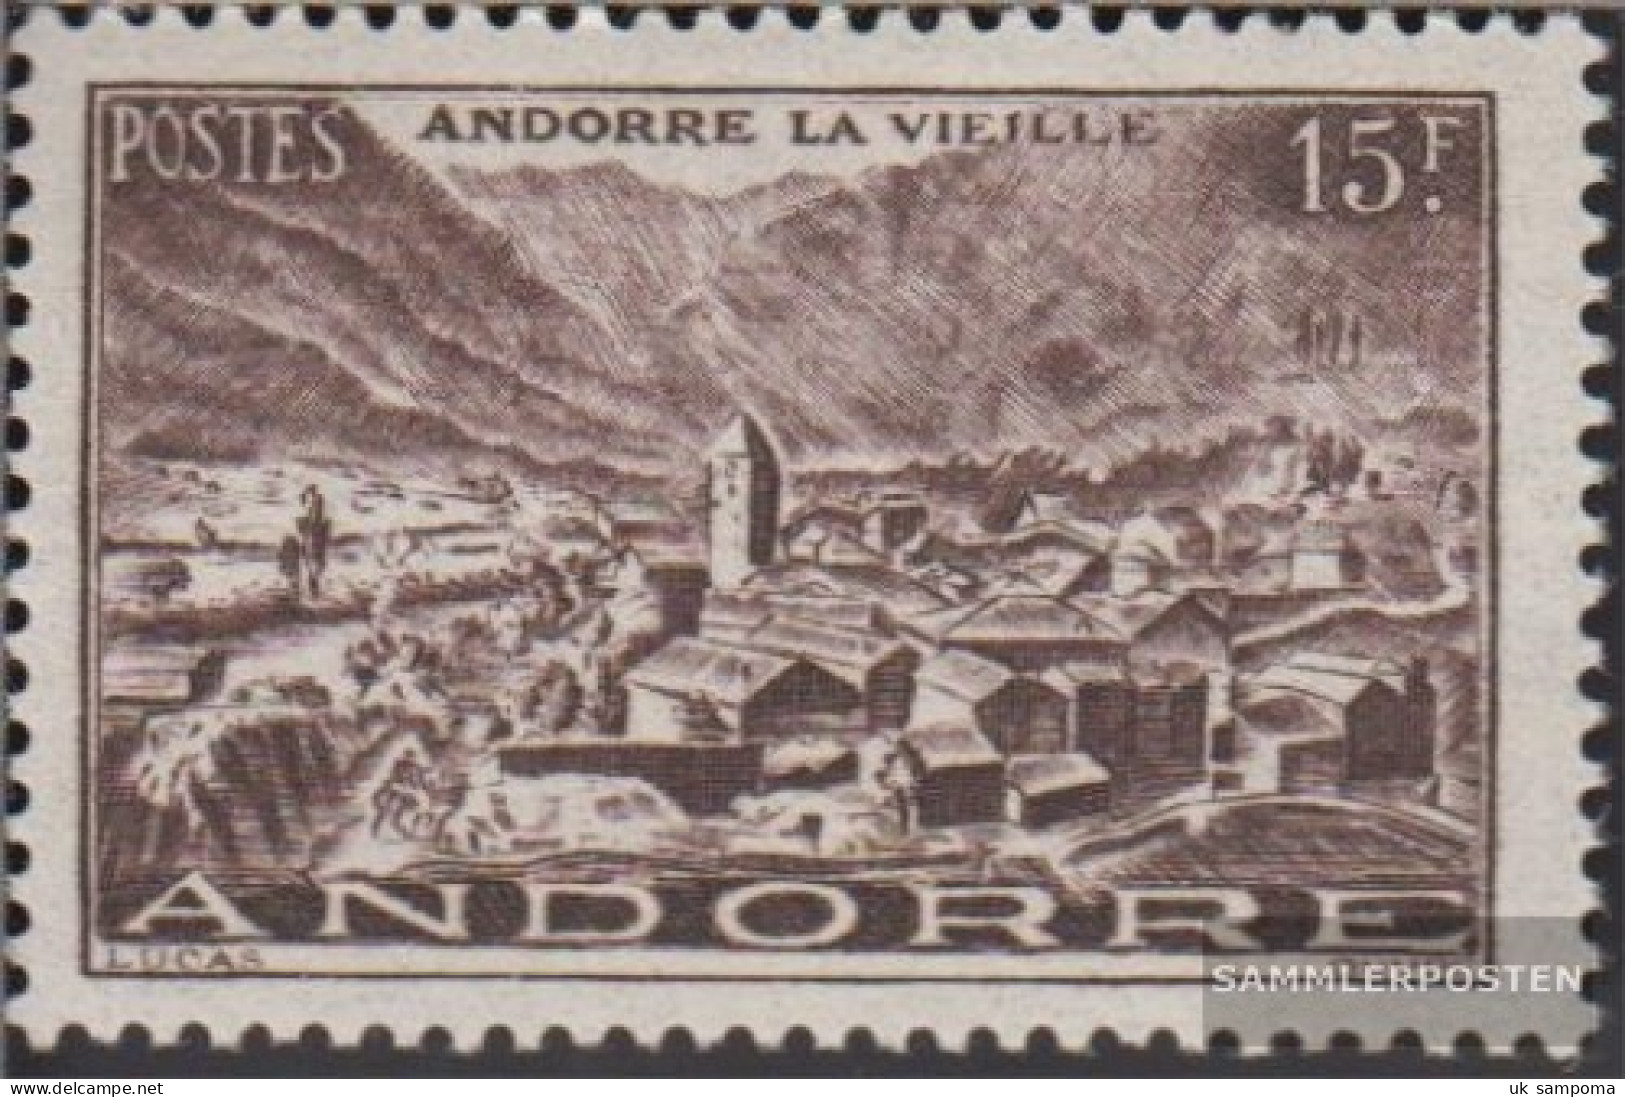 Andorra - French Post 131 Unmounted Mint / Never Hinged 1944 Landscapes - Carnets